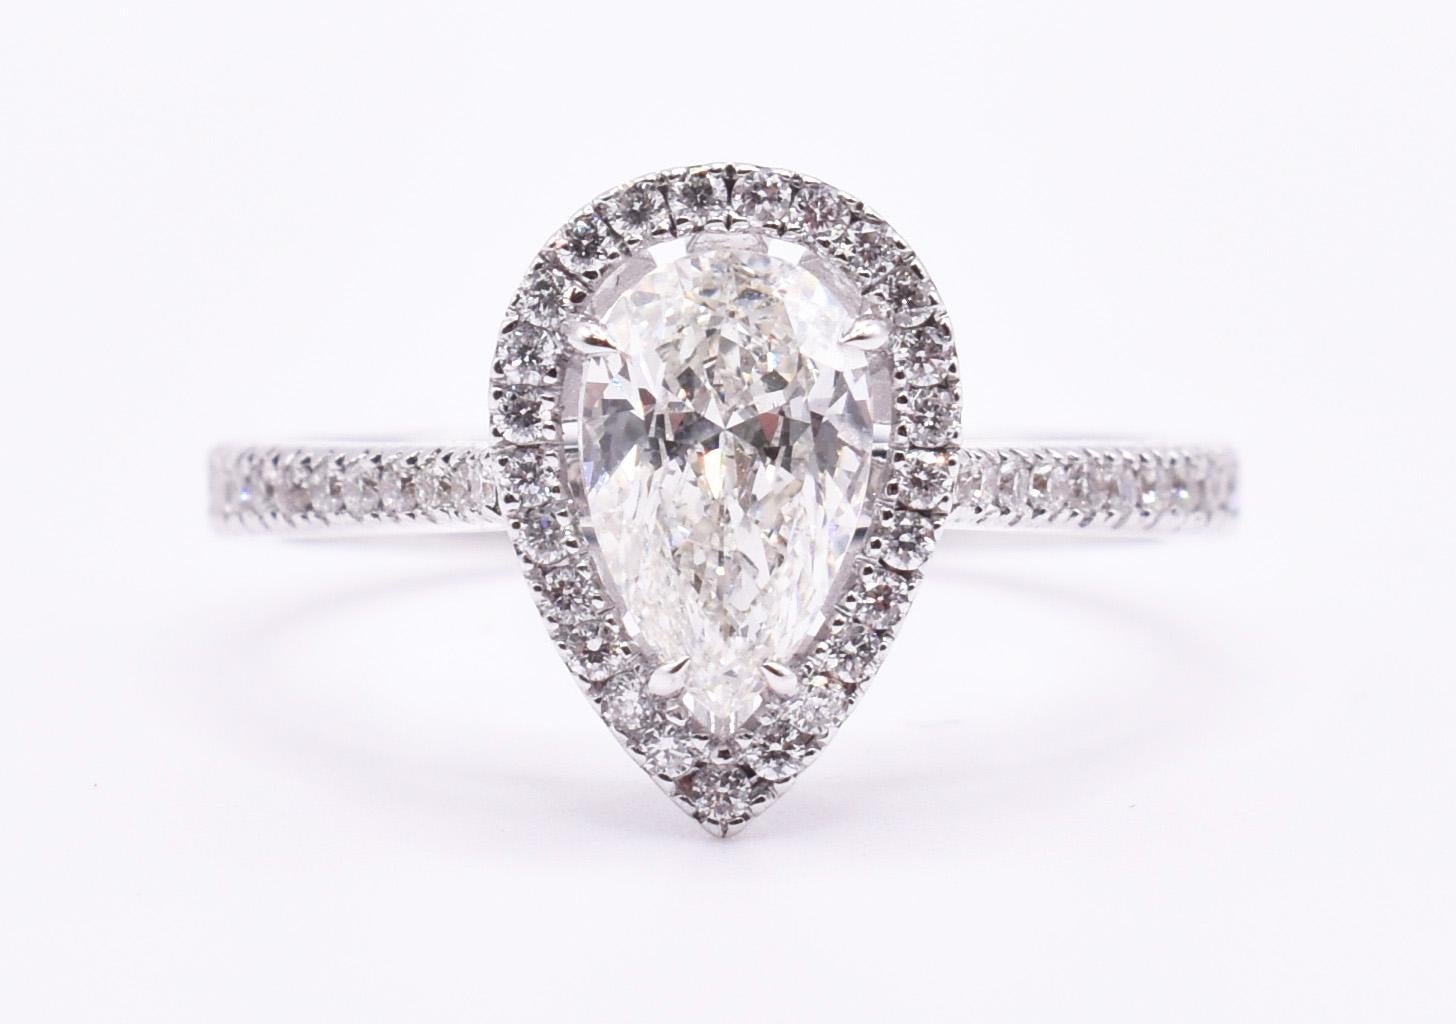 For sale is a fine quality 18k white gold diamond engagement ring, boasting a pear shaped 0.86 diamond to the centre, surrounded by a halo of brilliant cut diamonds, with further pavé set diamond sides. 

Metal: 18k White Gold
Total Carat Weight: